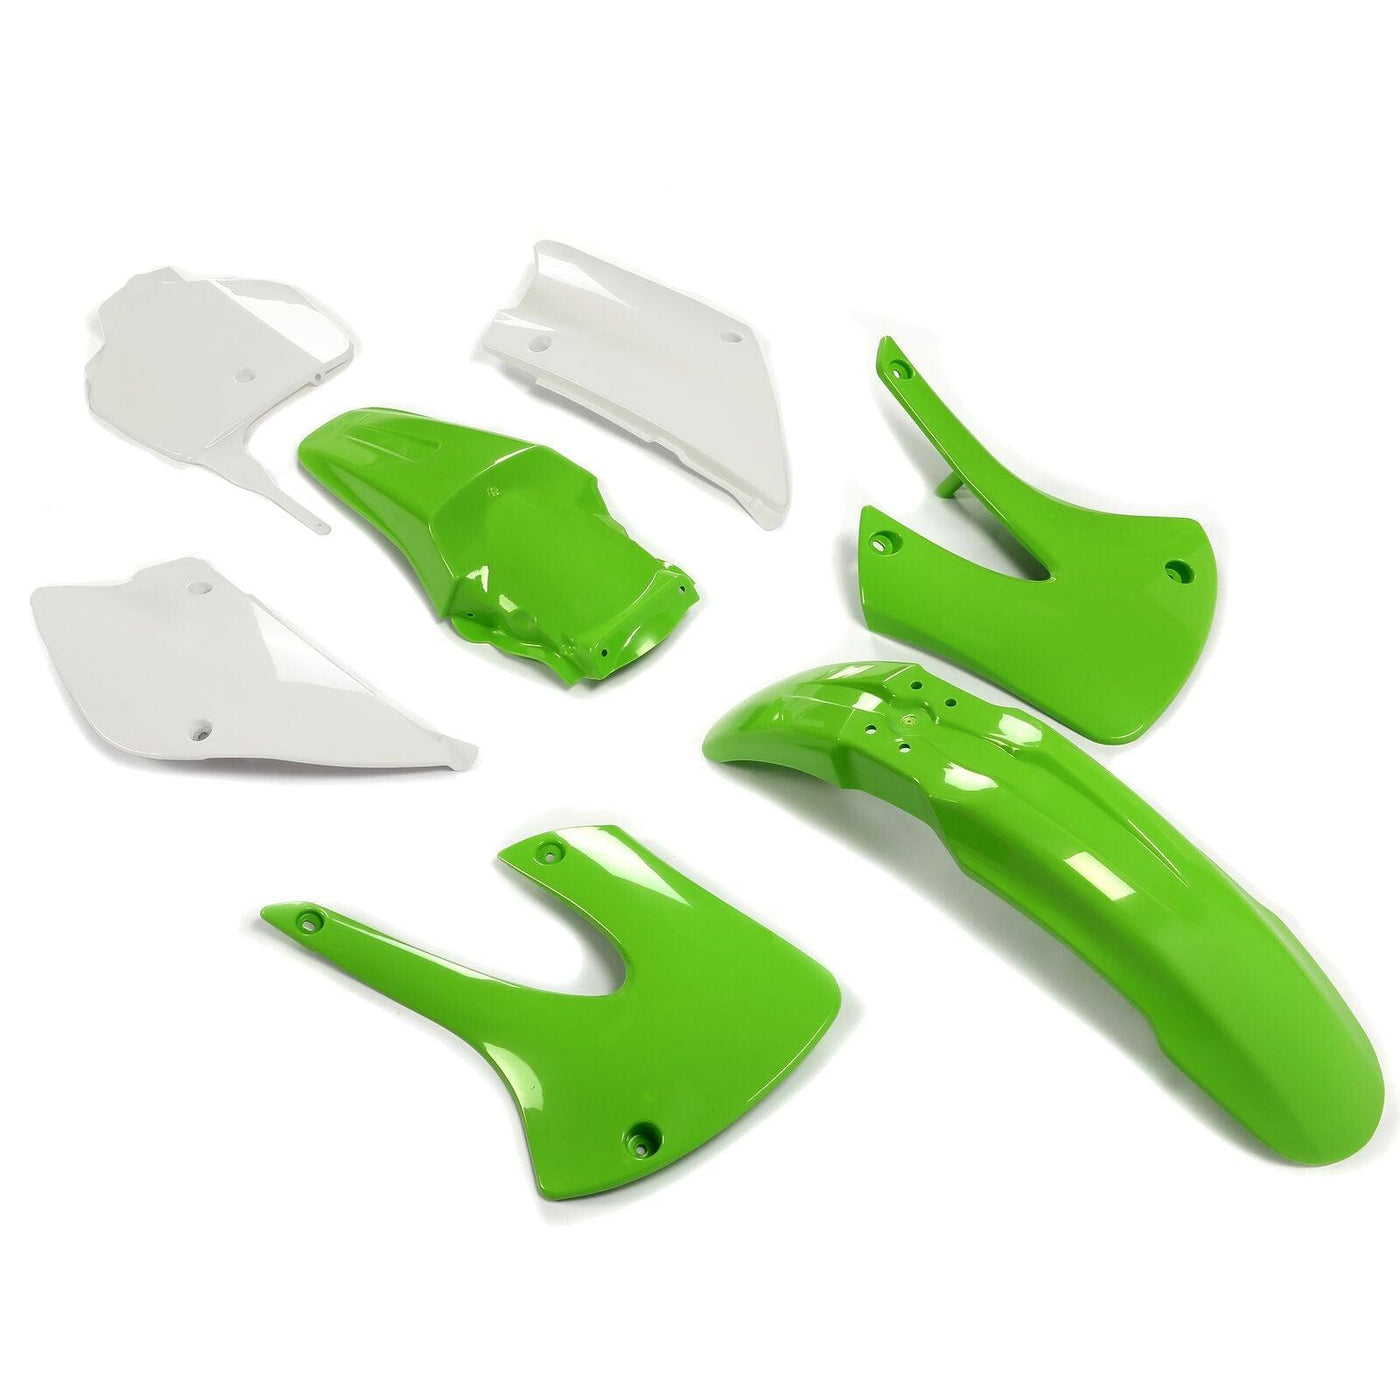 Restyled Plastic Body Kit For Kawasaki KX85/KX100 2001-2013 Green & White Colors - Moto Life Products